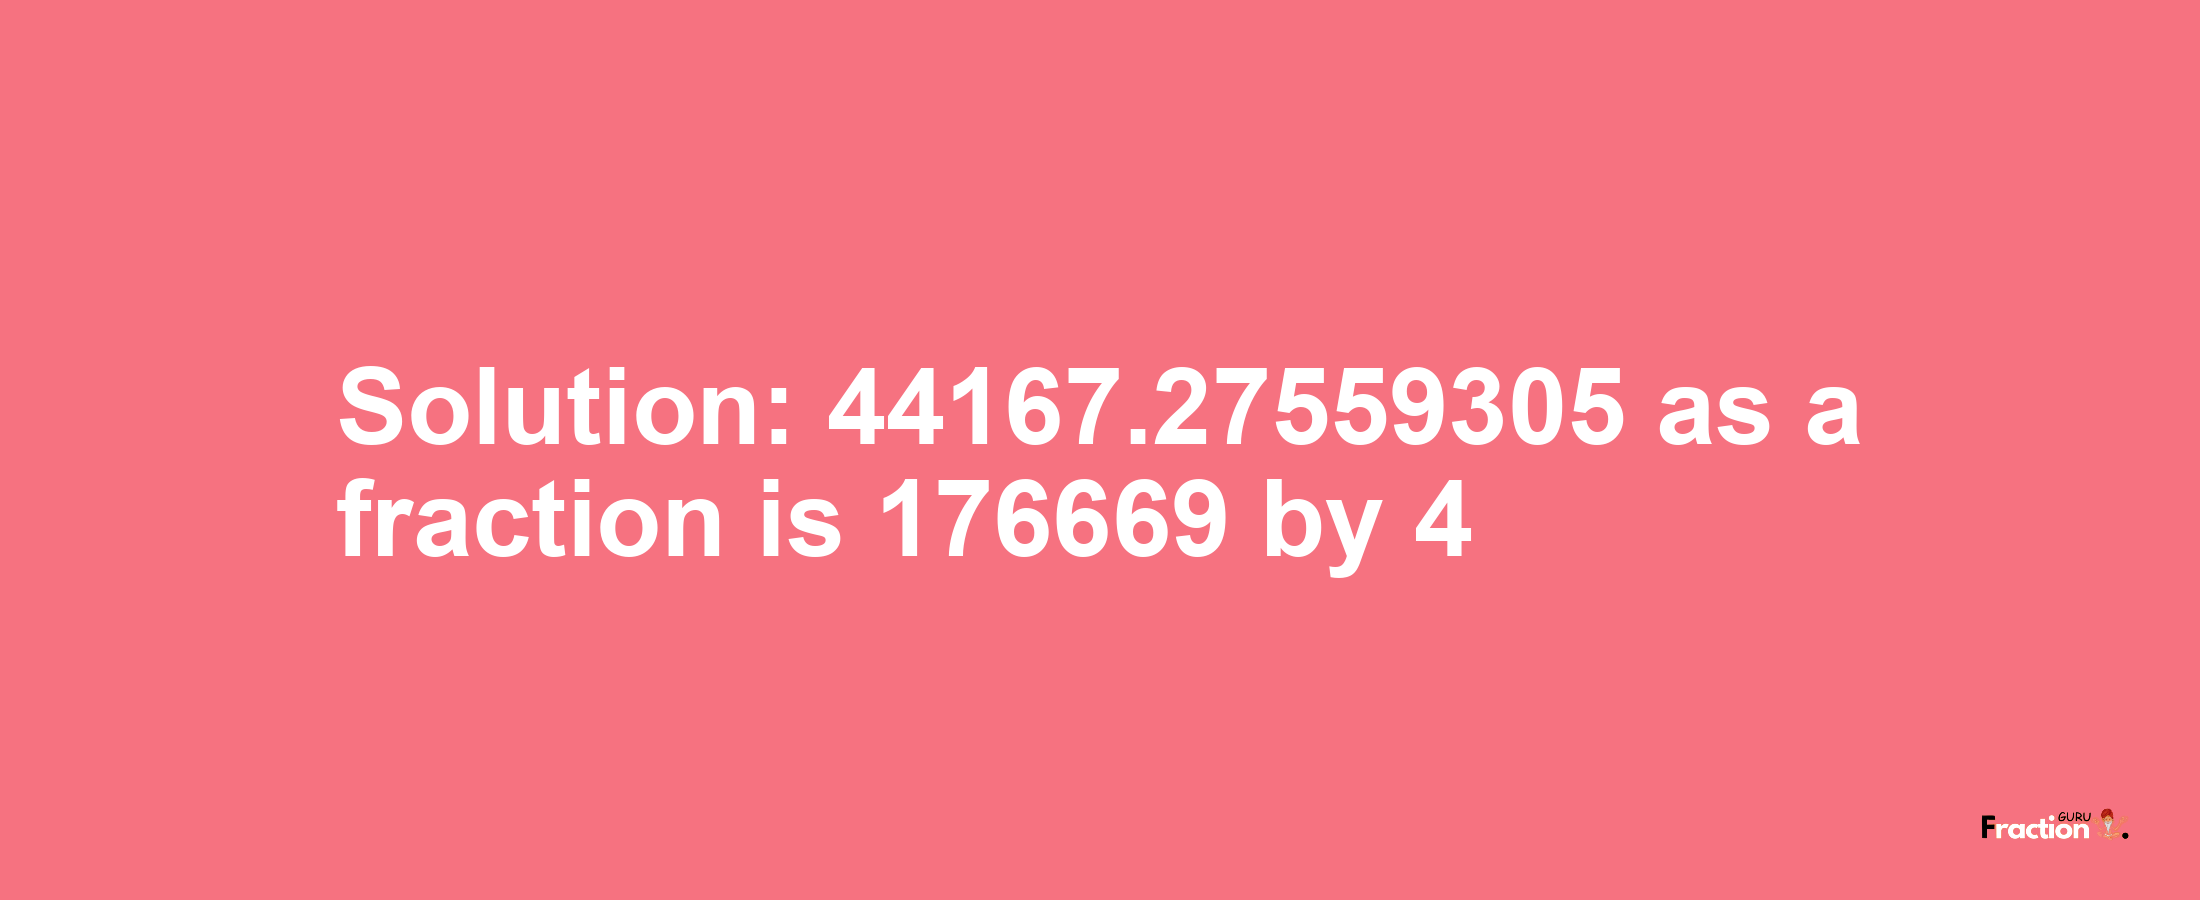 Solution:44167.27559305 as a fraction is 176669/4